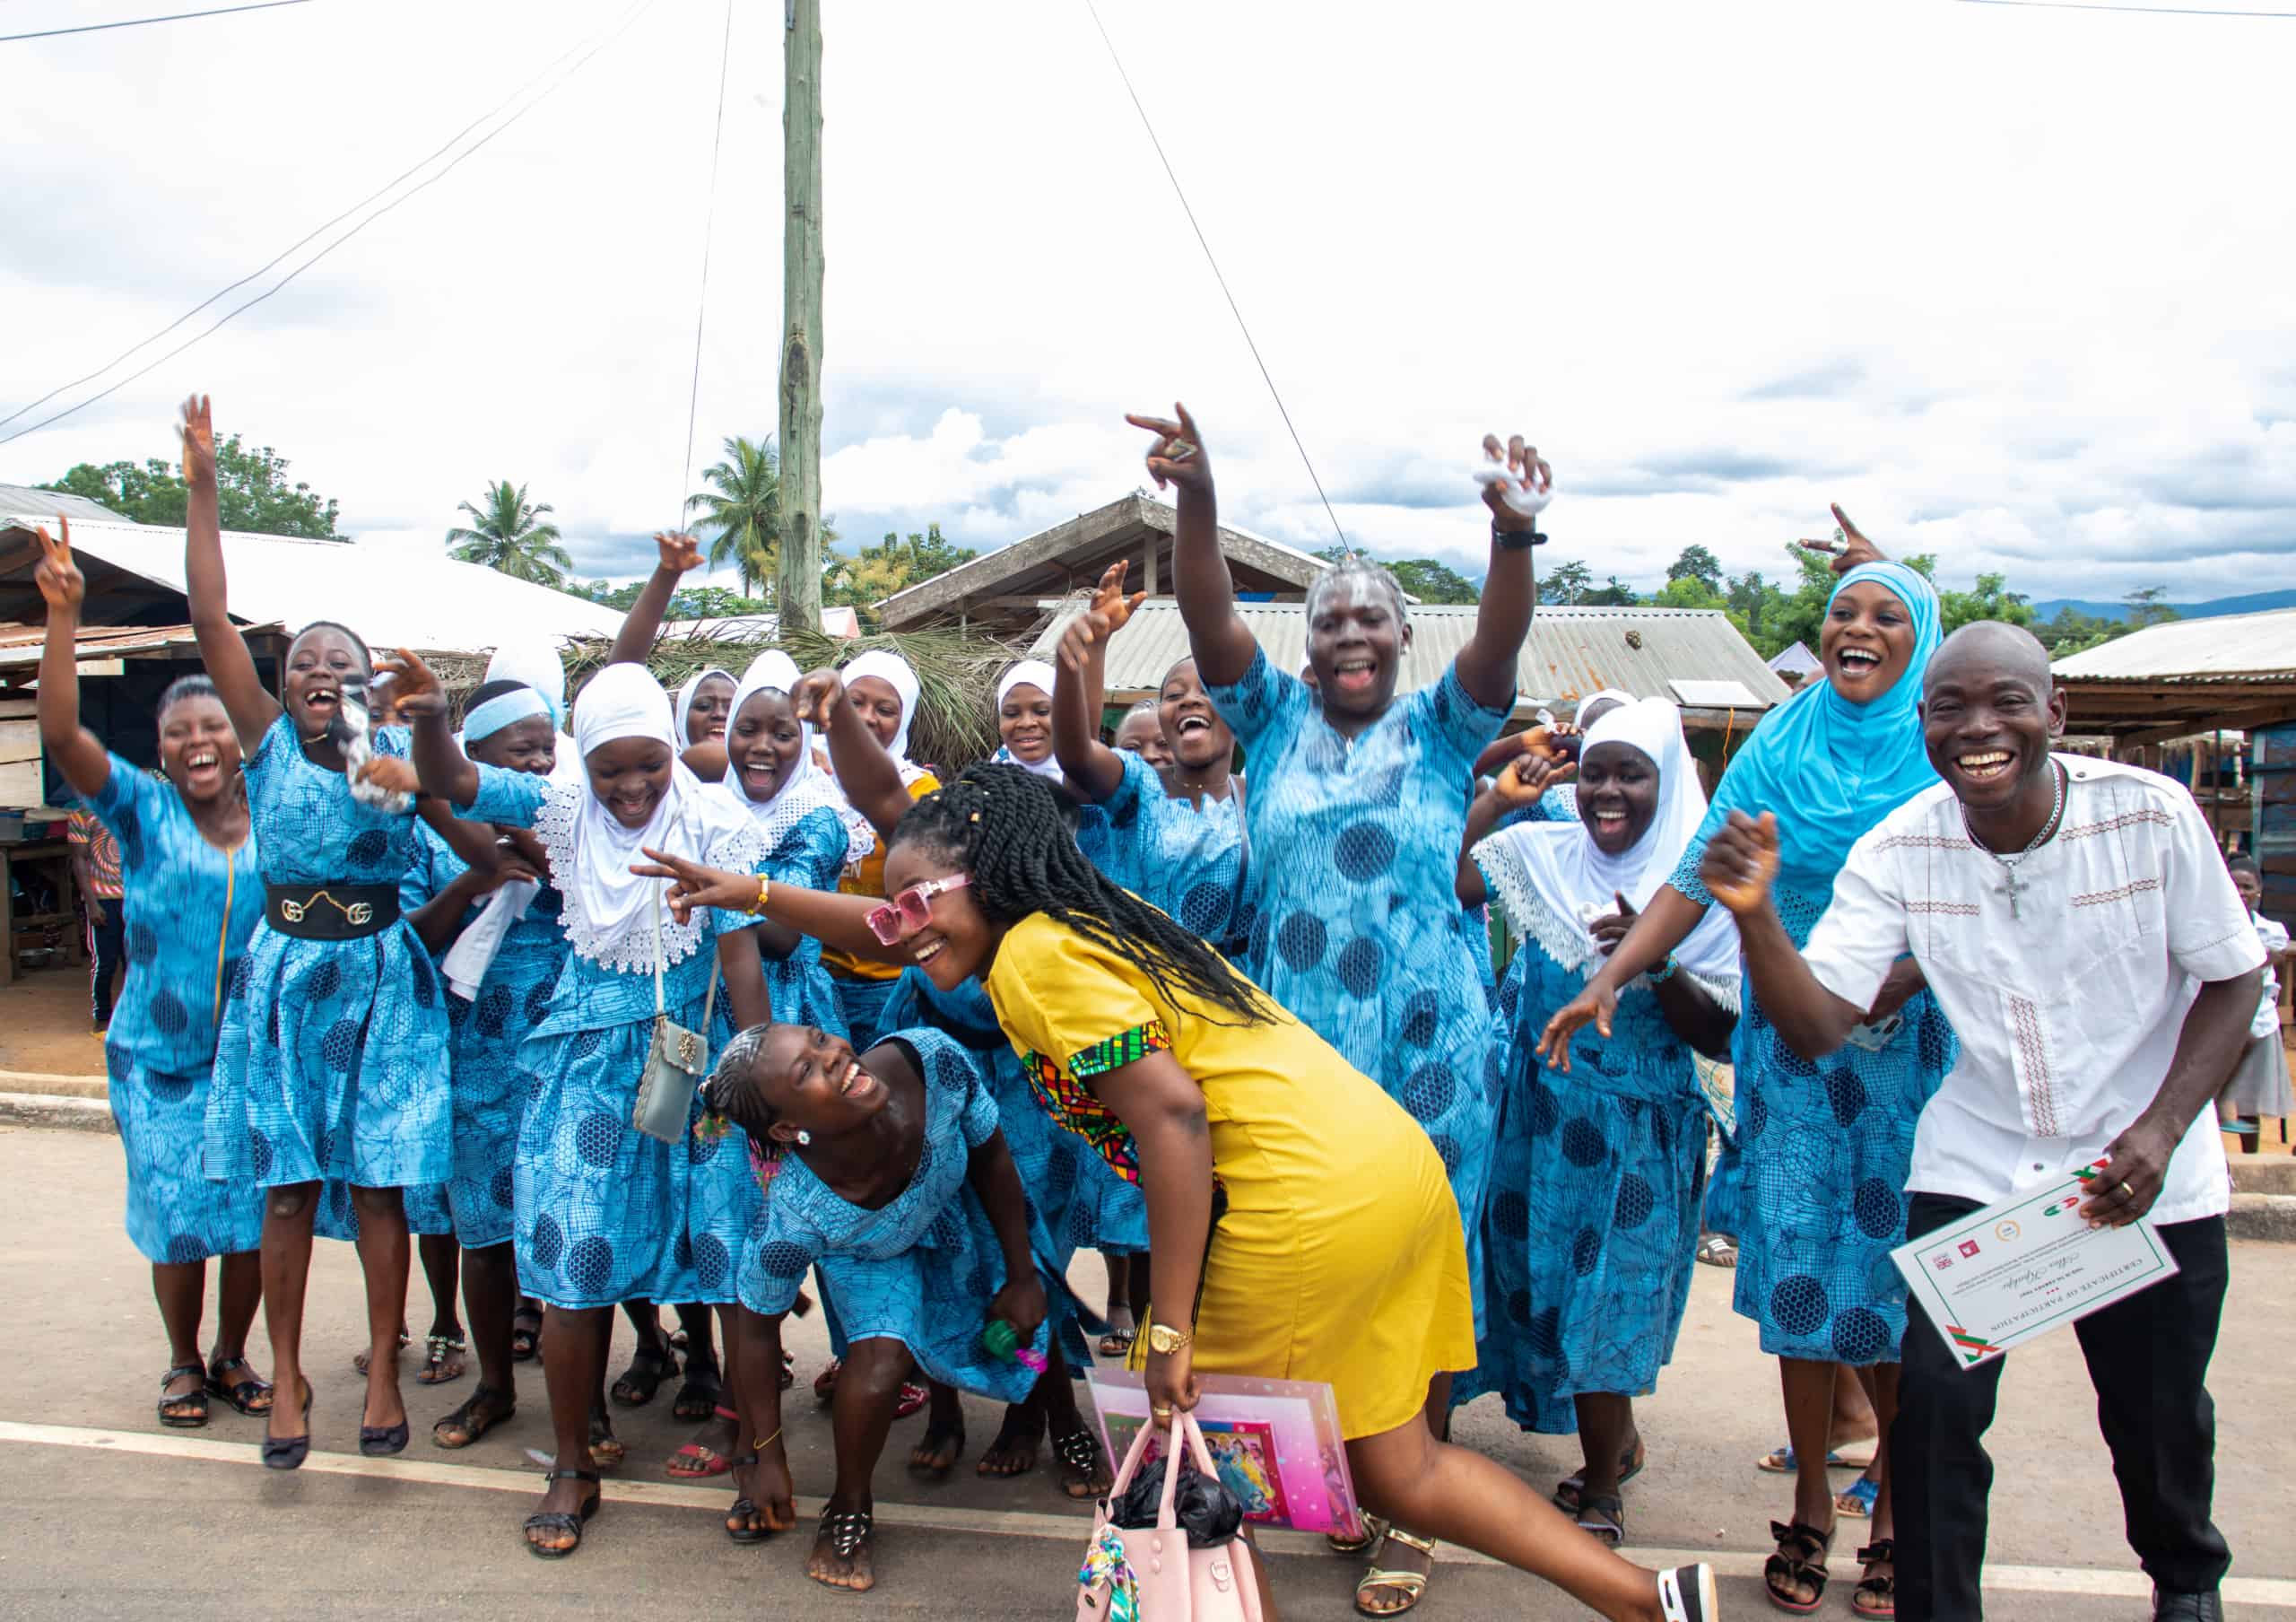 A Graduation Celebration for 3000 Young Women in Ghana